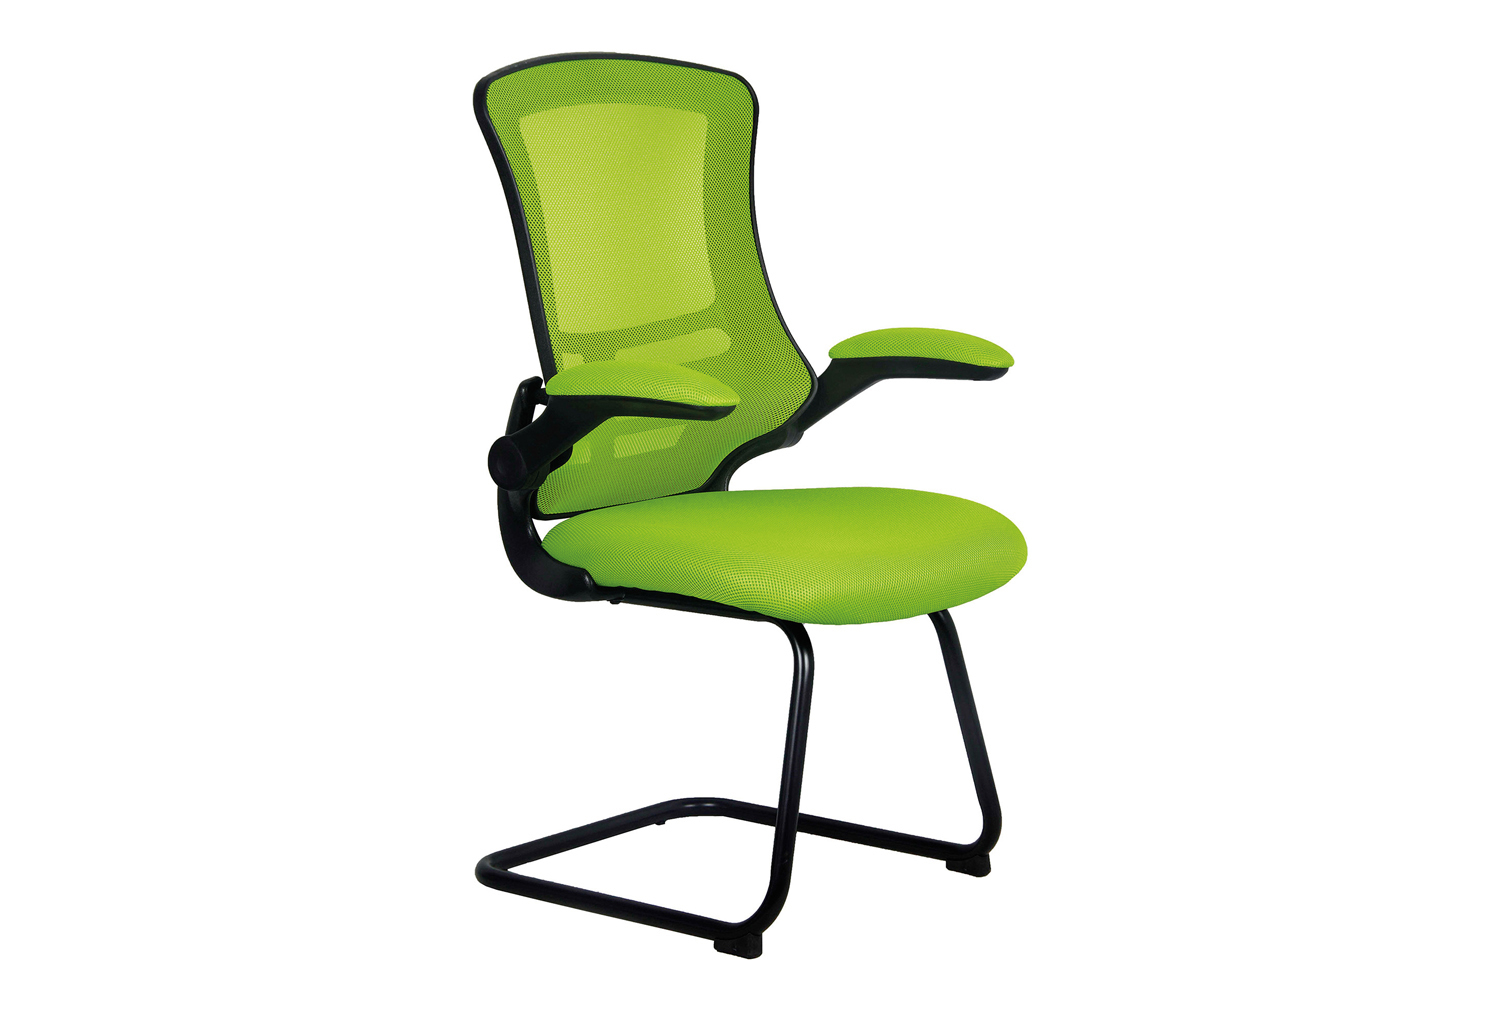 Moon Mesh Back Visitor Office Chair With Black Frame (Lime Green), Express Delivery